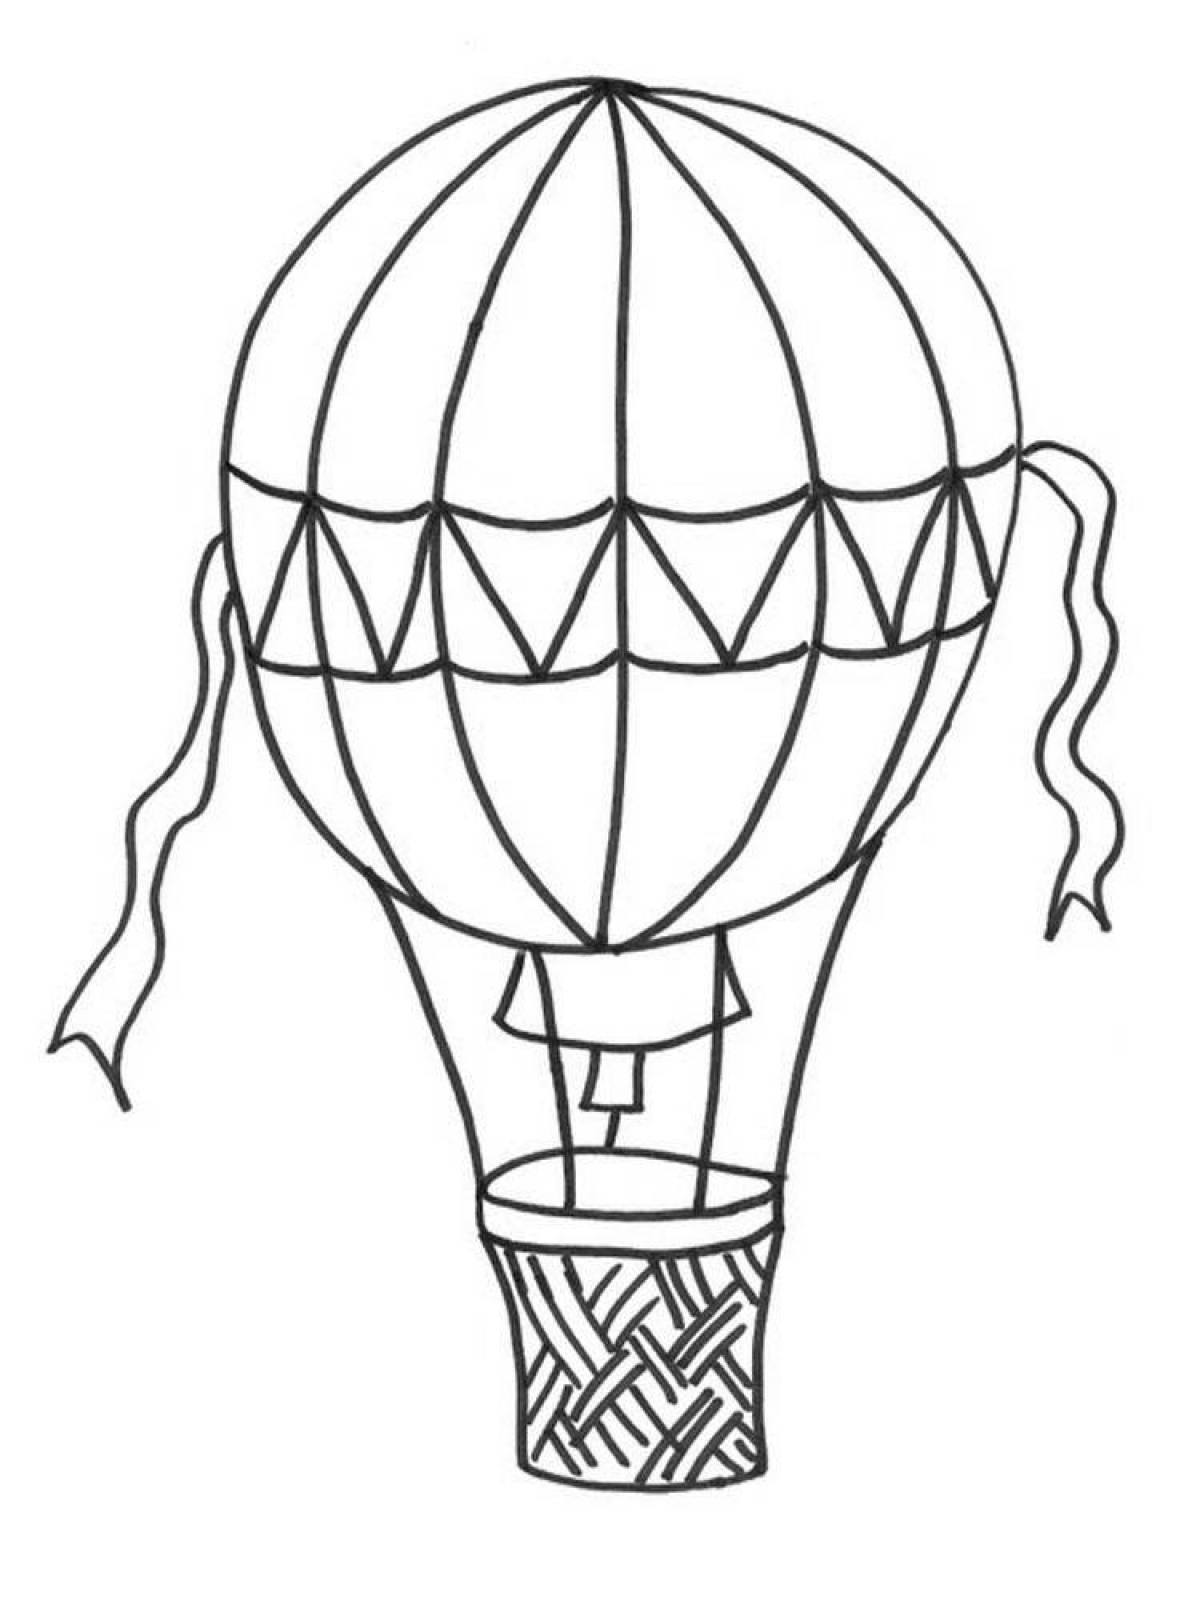 Coloring page funny balloon with a basket